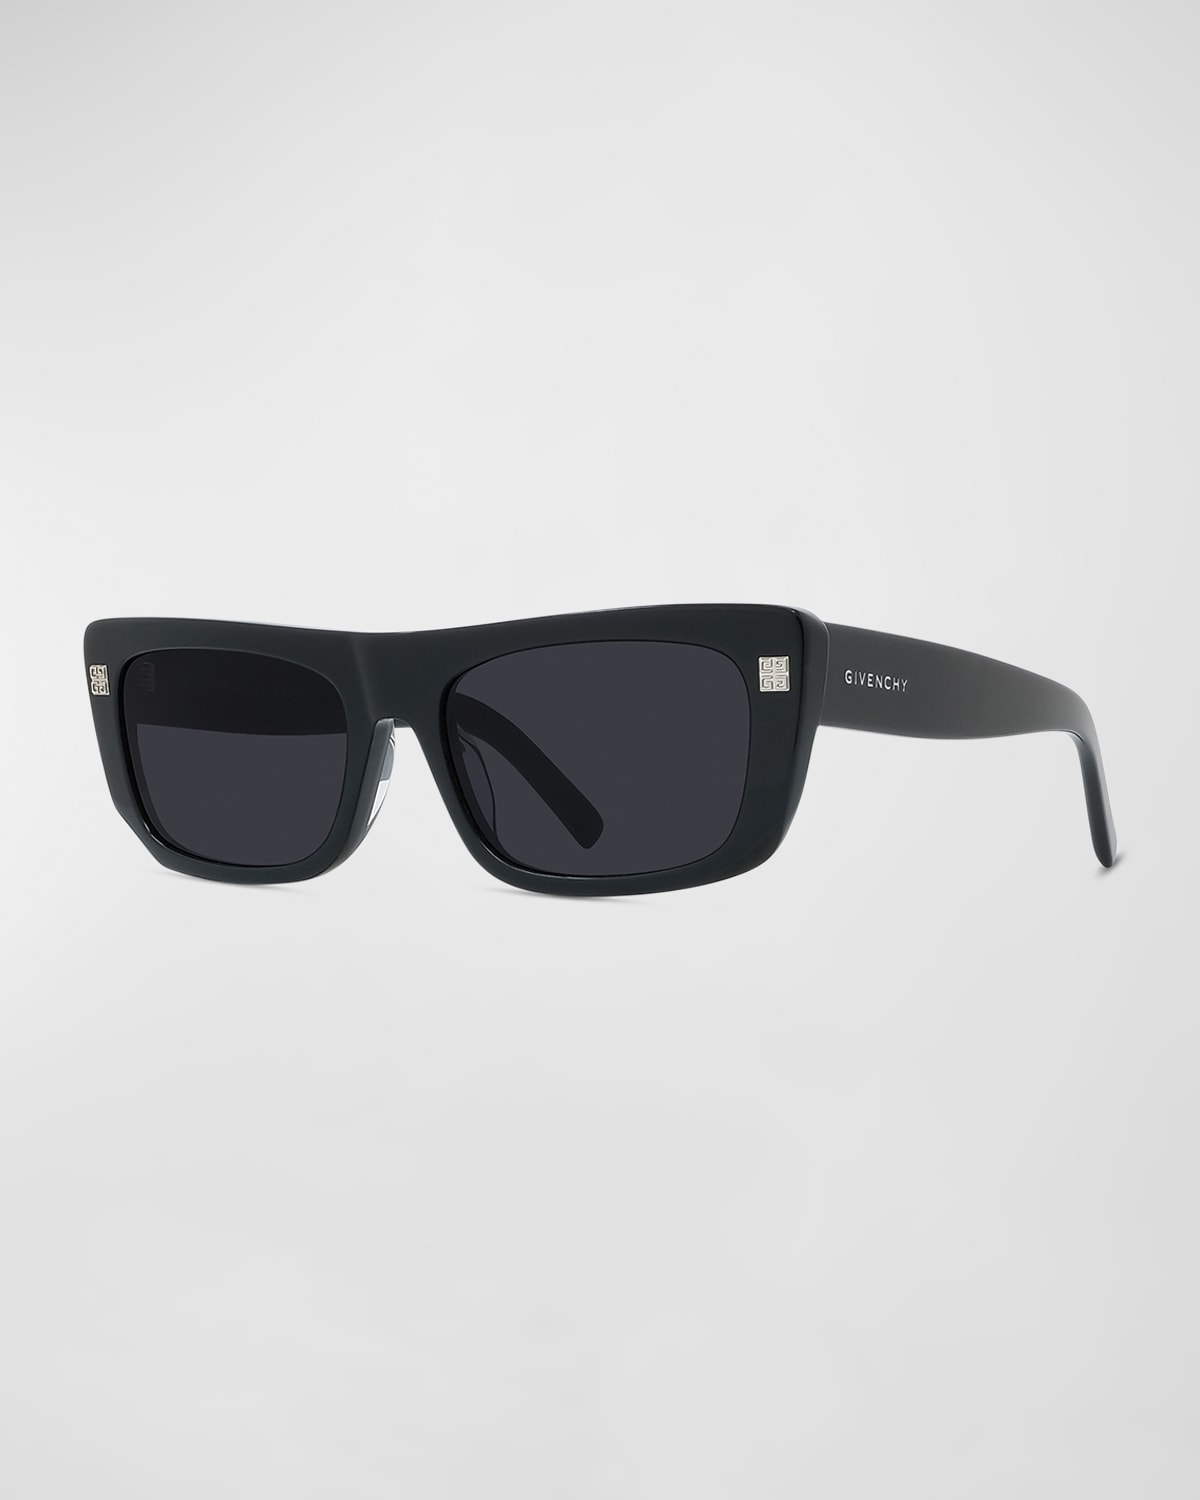 GIVENCHY MEN'S GV DAY 4G RECTANGLE SUNGLASSES